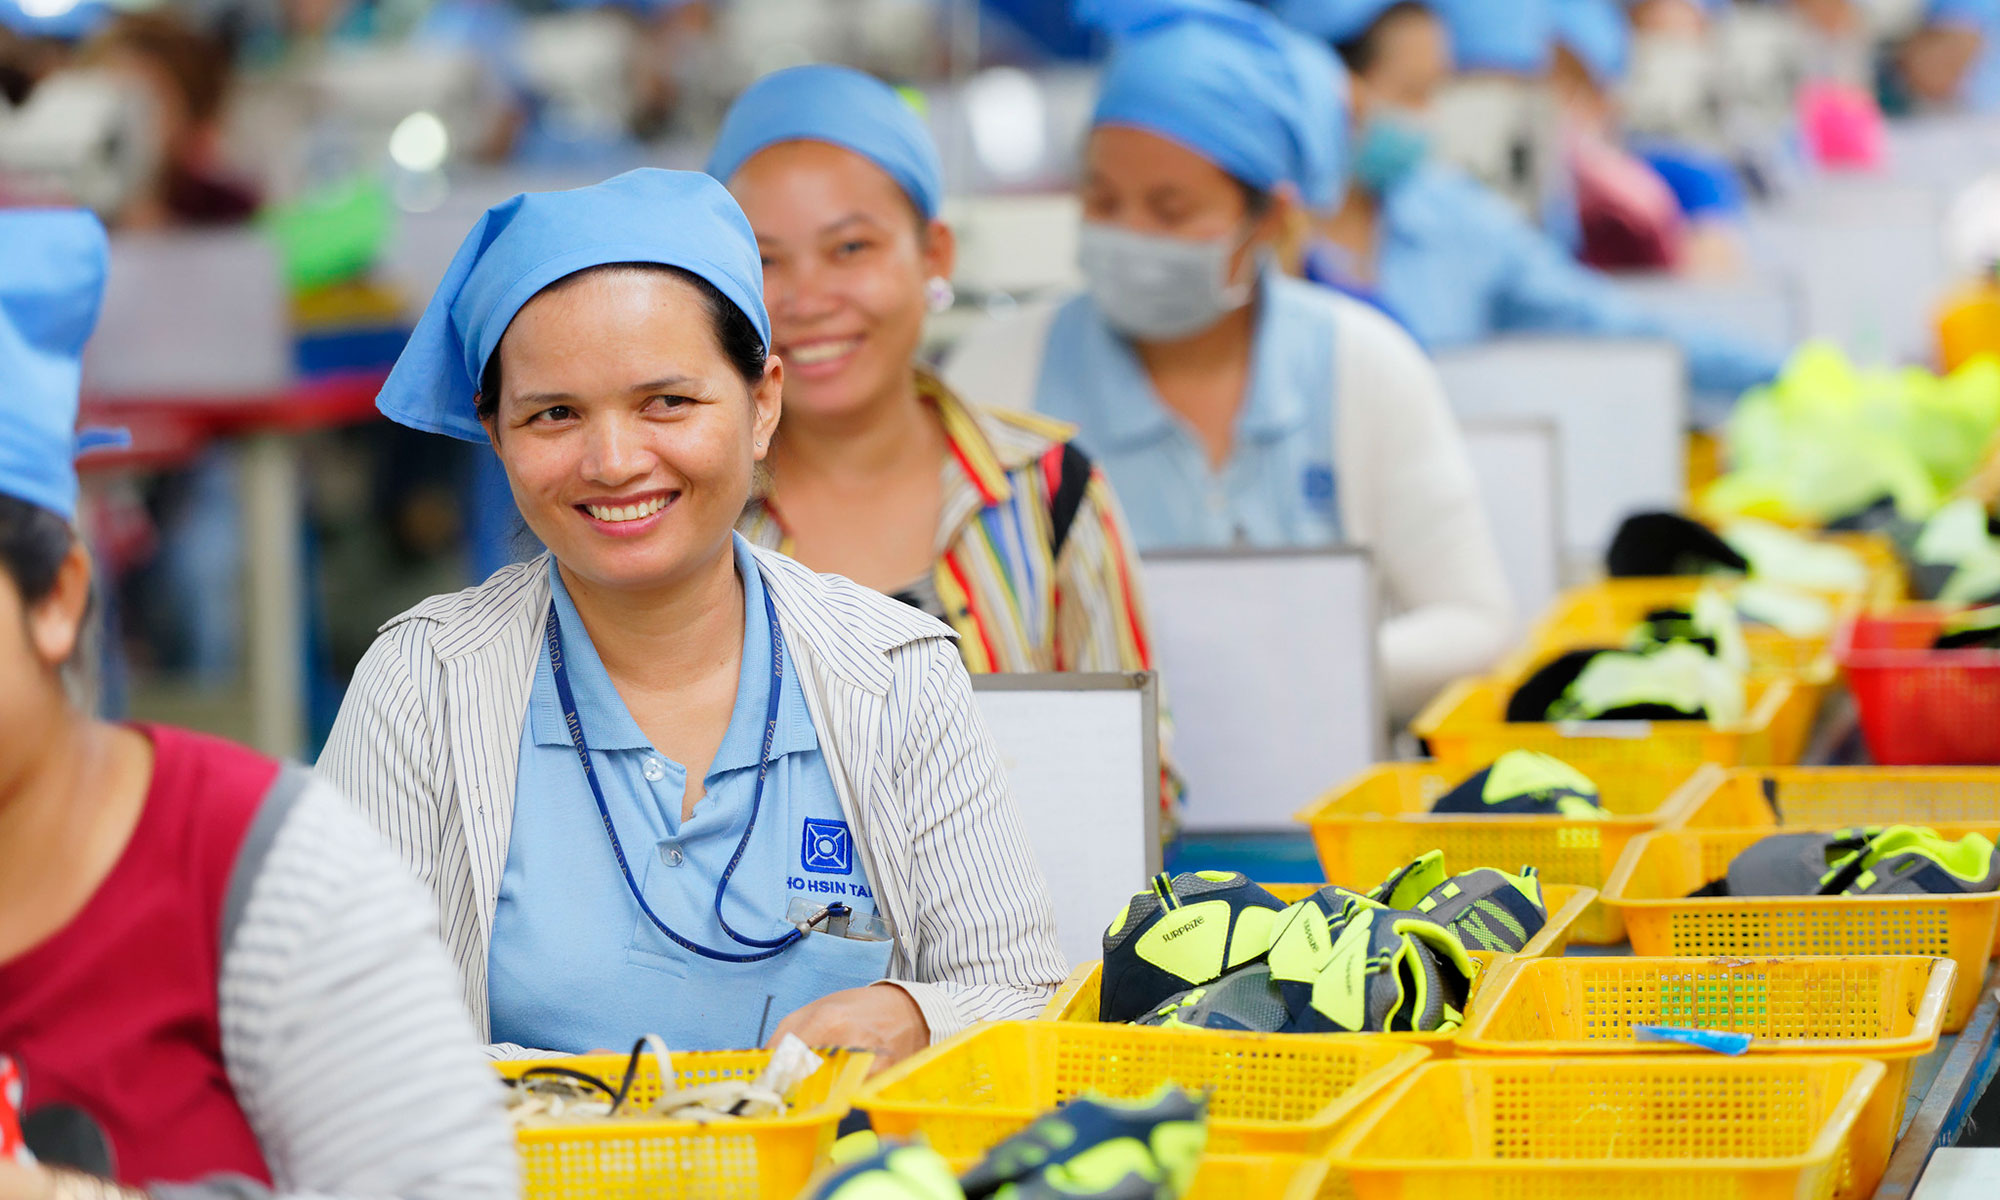 A factory worker is seen smiling during her shift in a footwear manufacturing plant in Cambodia. Photo : Marcel Crozet / ILO